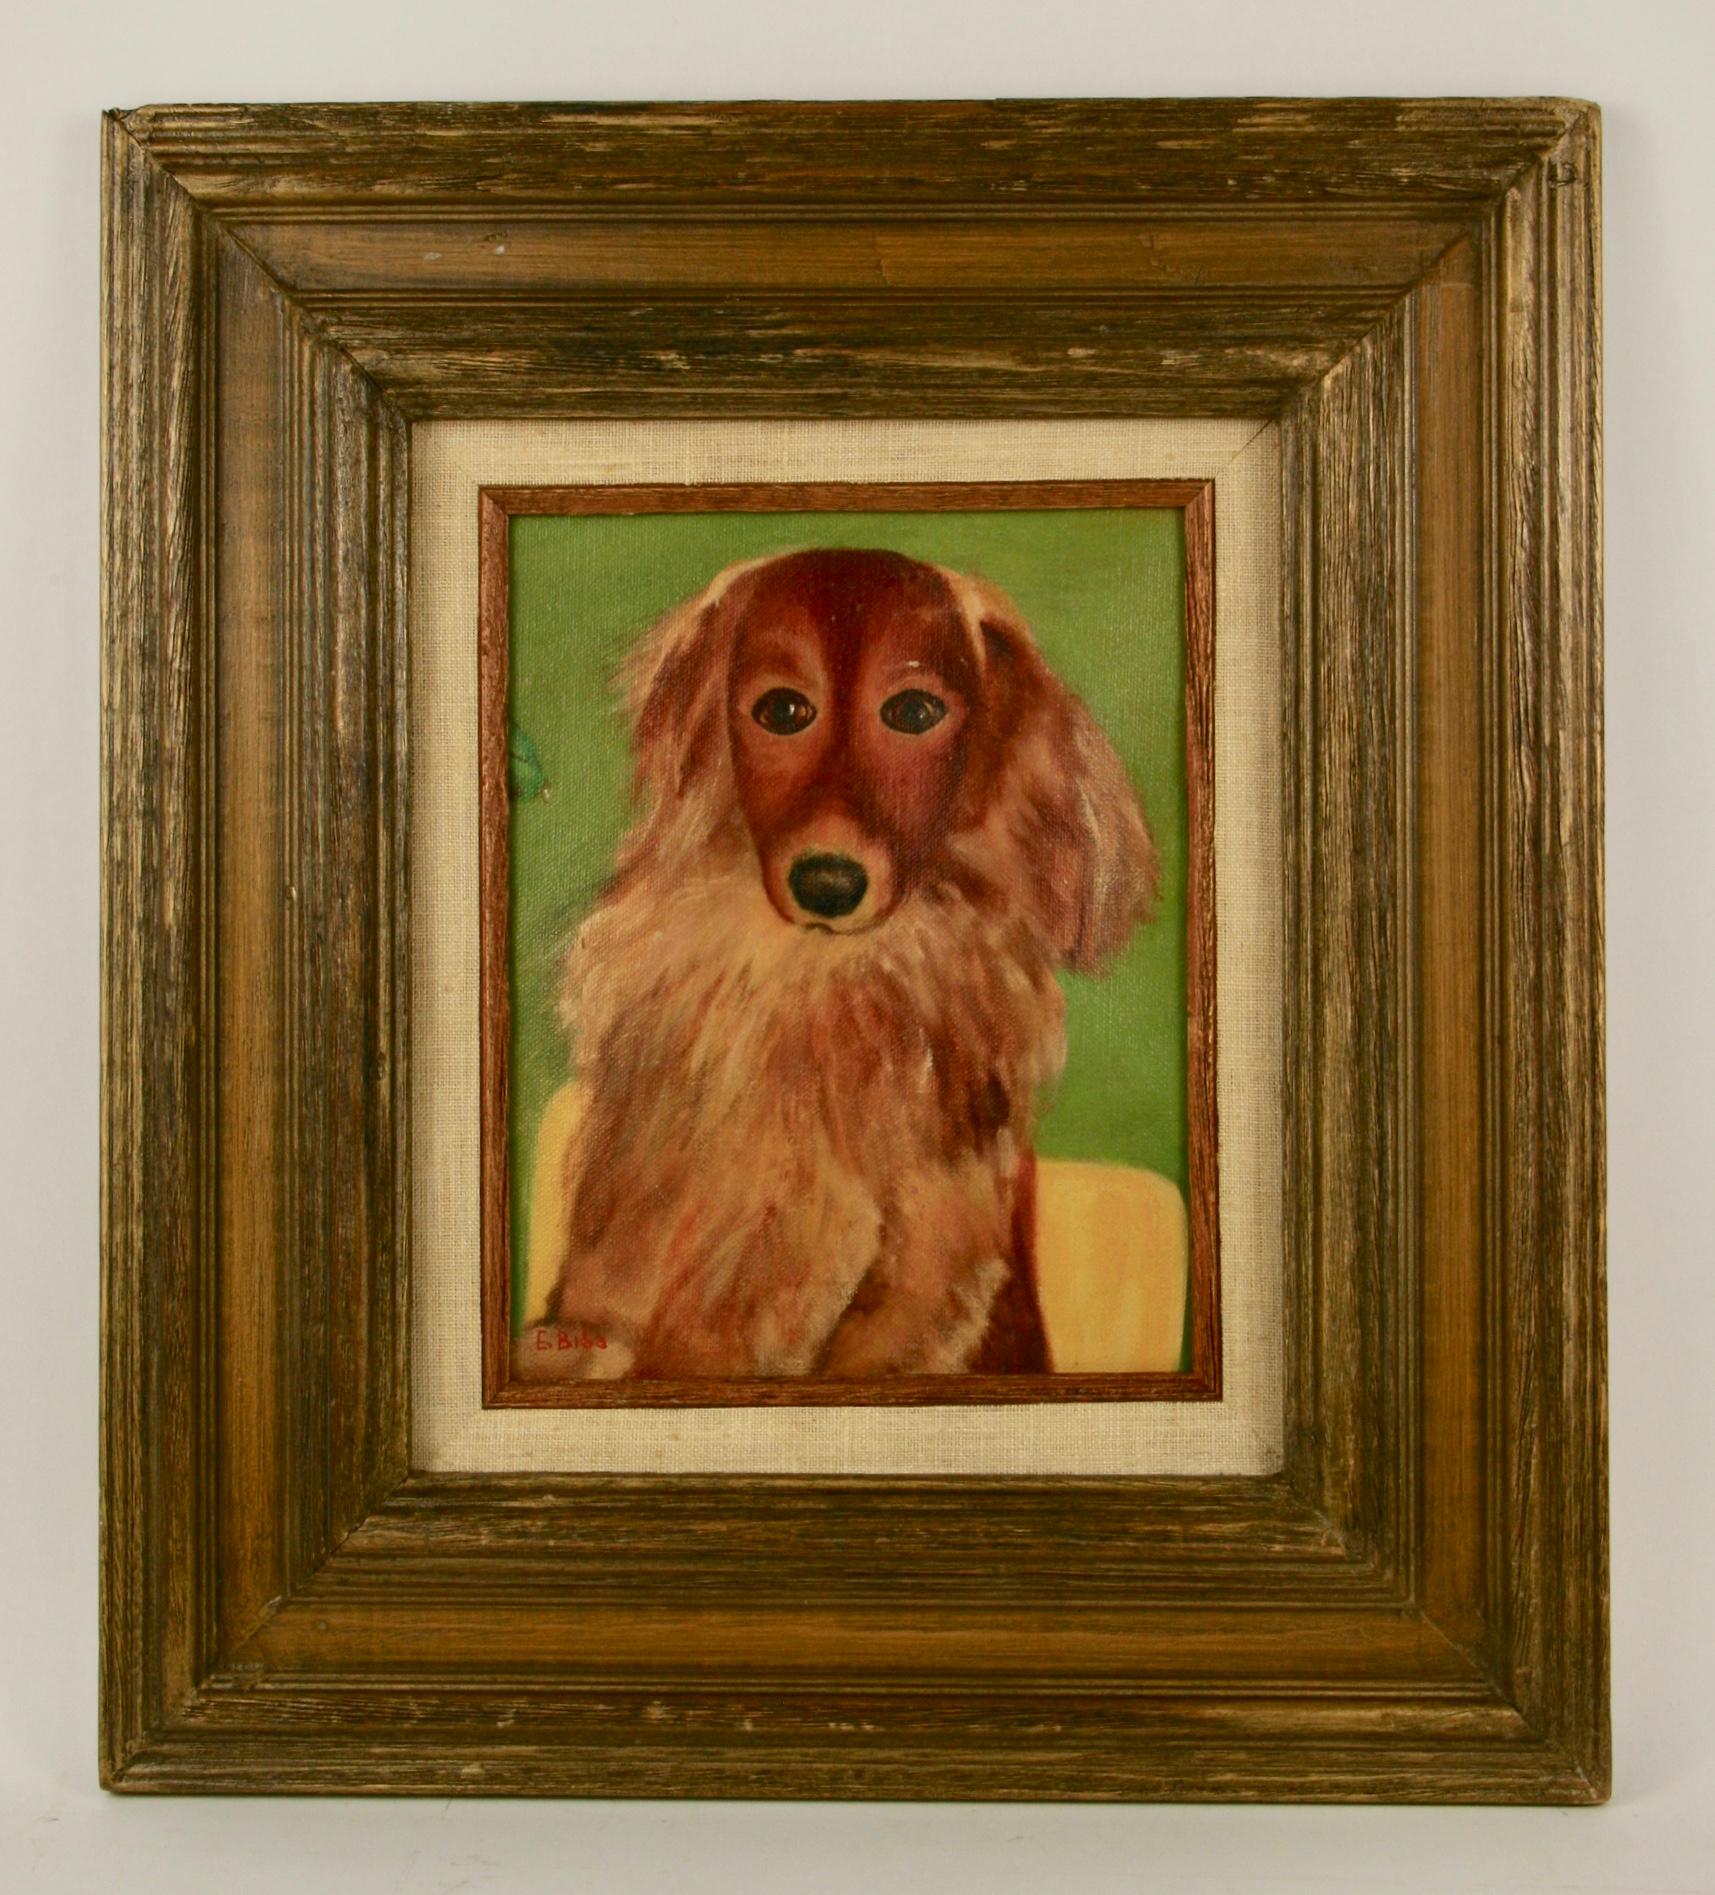 #5-2977 Best Friend,oil on canvas applied to a board, signed by E.Biba lower left ,displayed t in a gilt wood frame.
Age wear on the frame